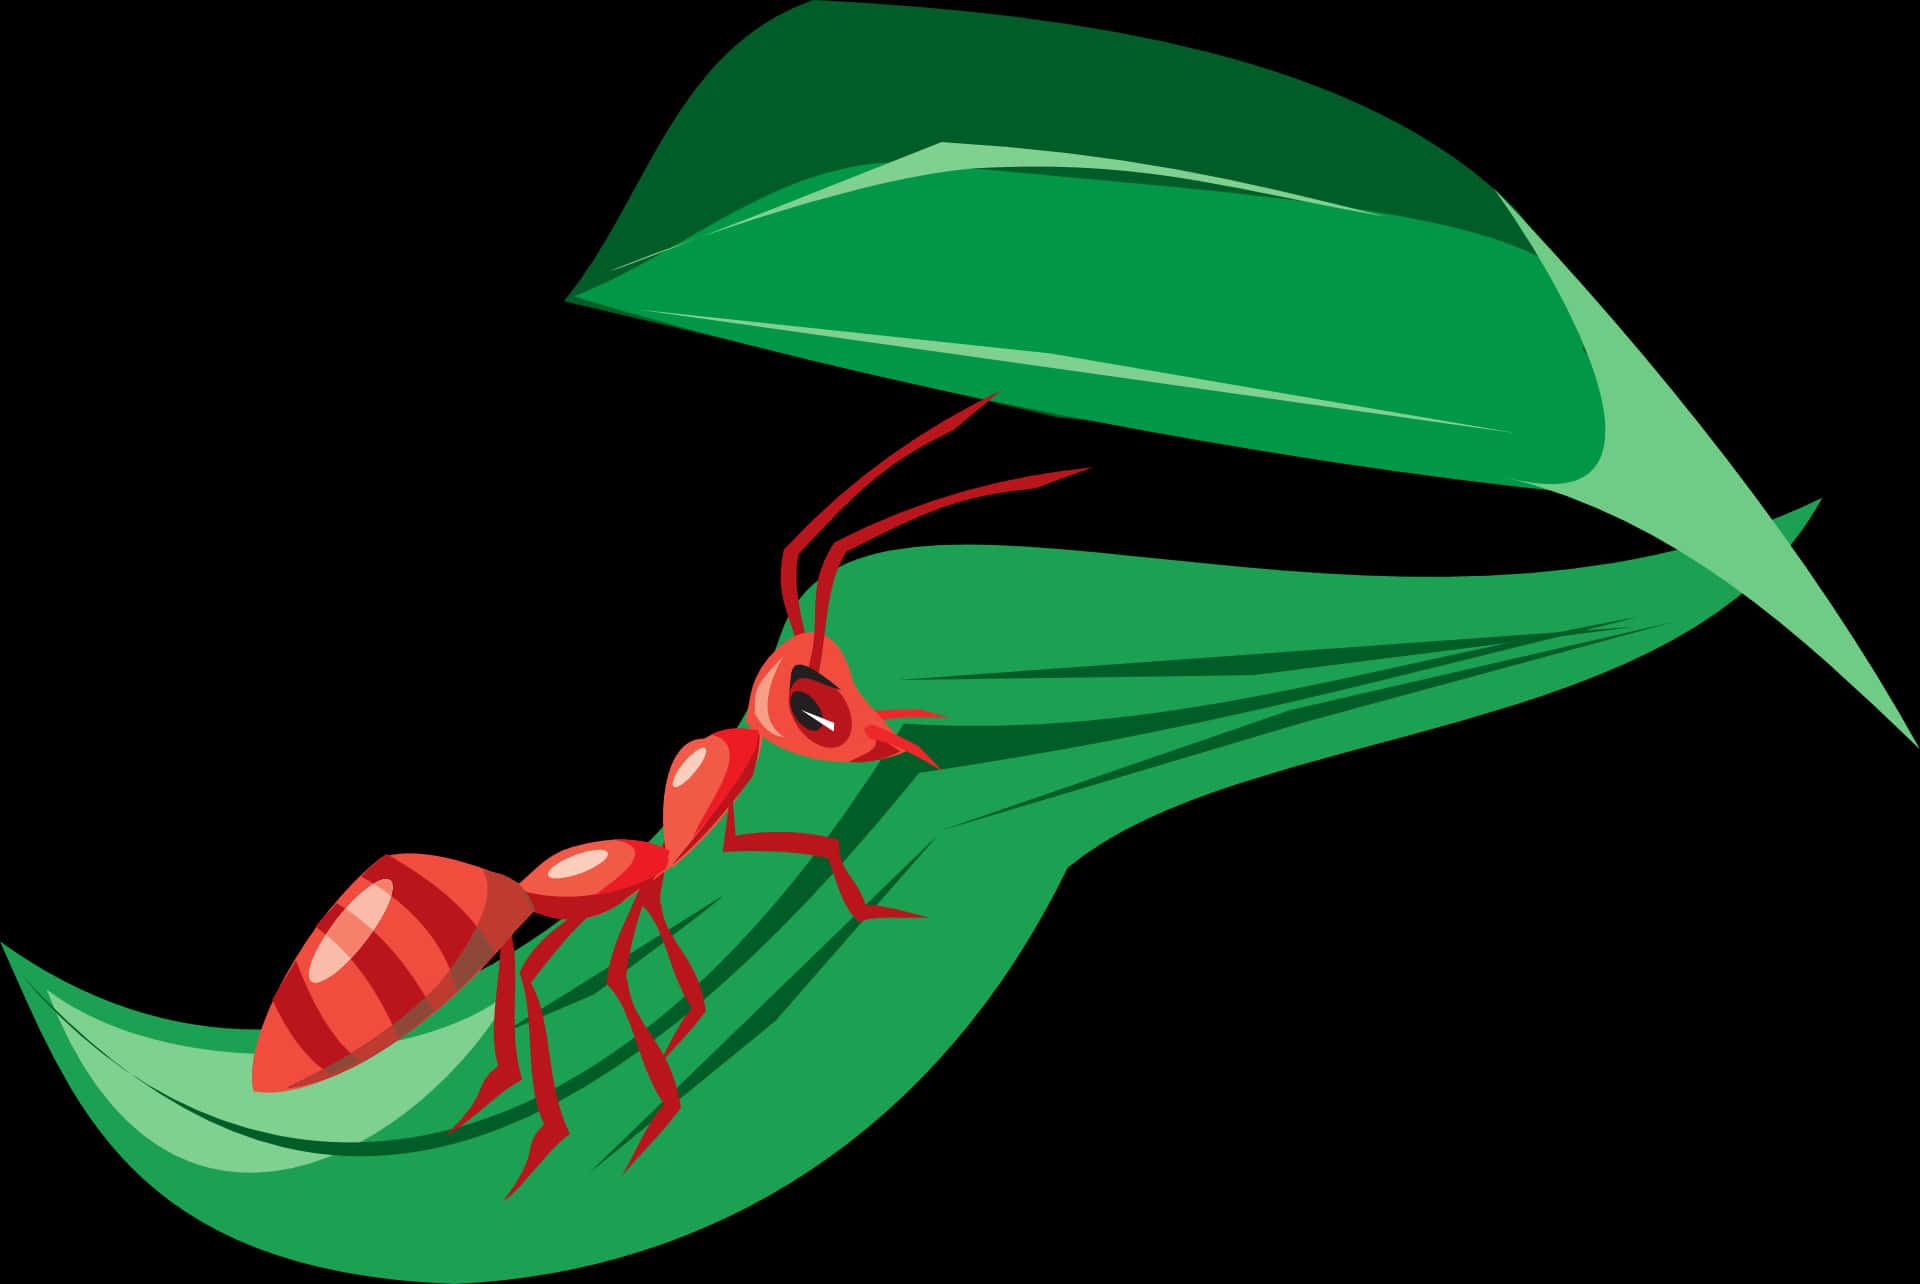 A Red Ant On A Green Leaf